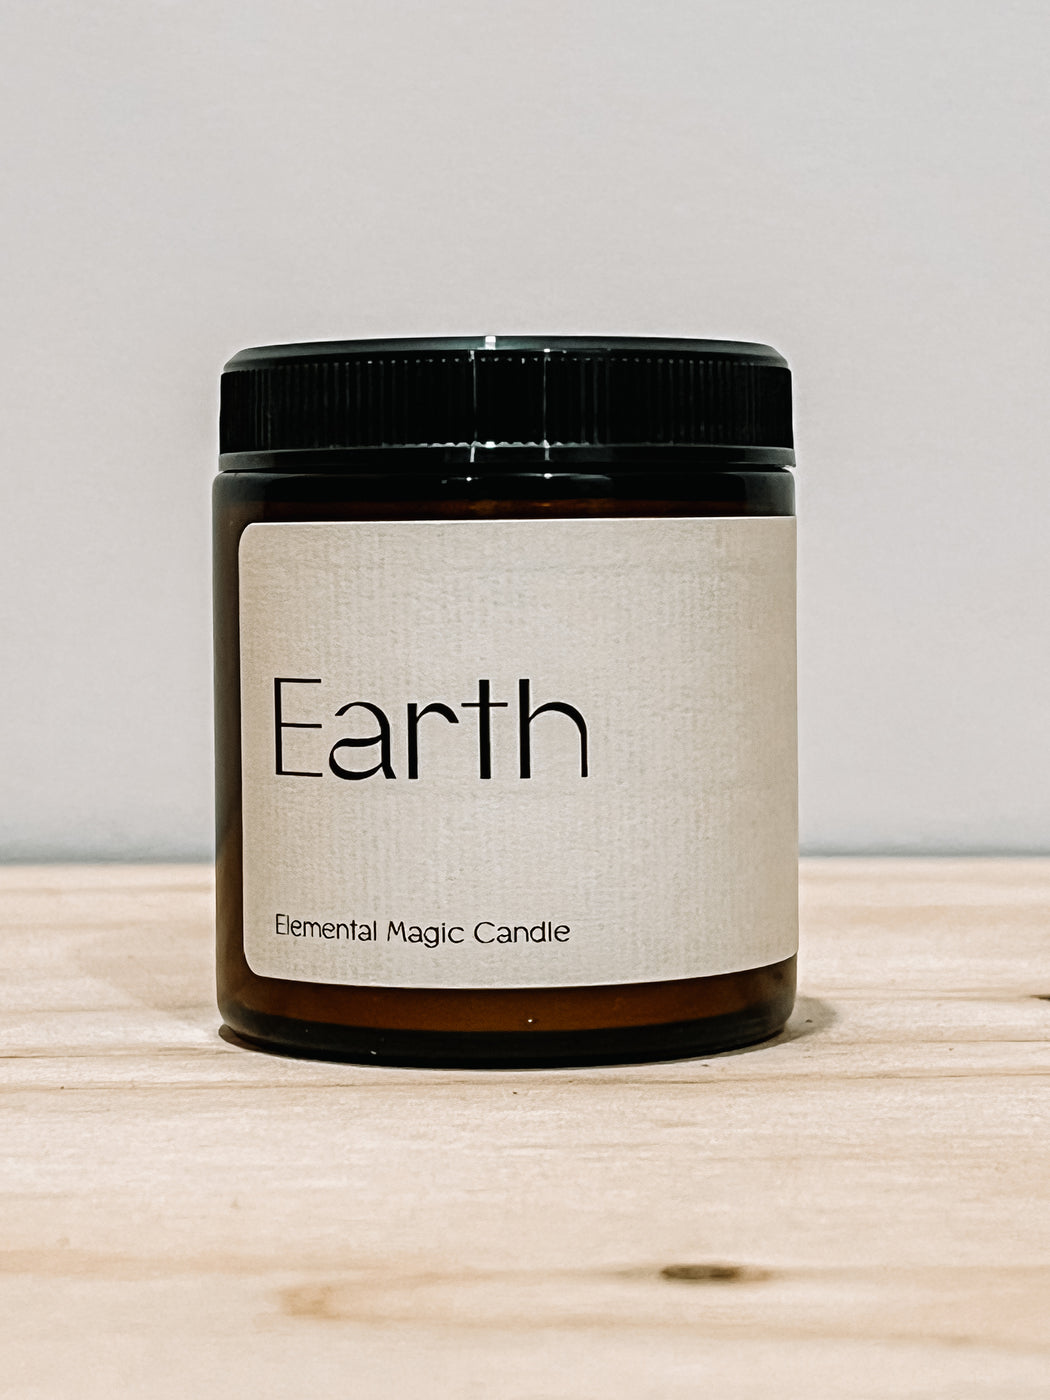 Species by the Thousands- Earth Elemental Magic Candle